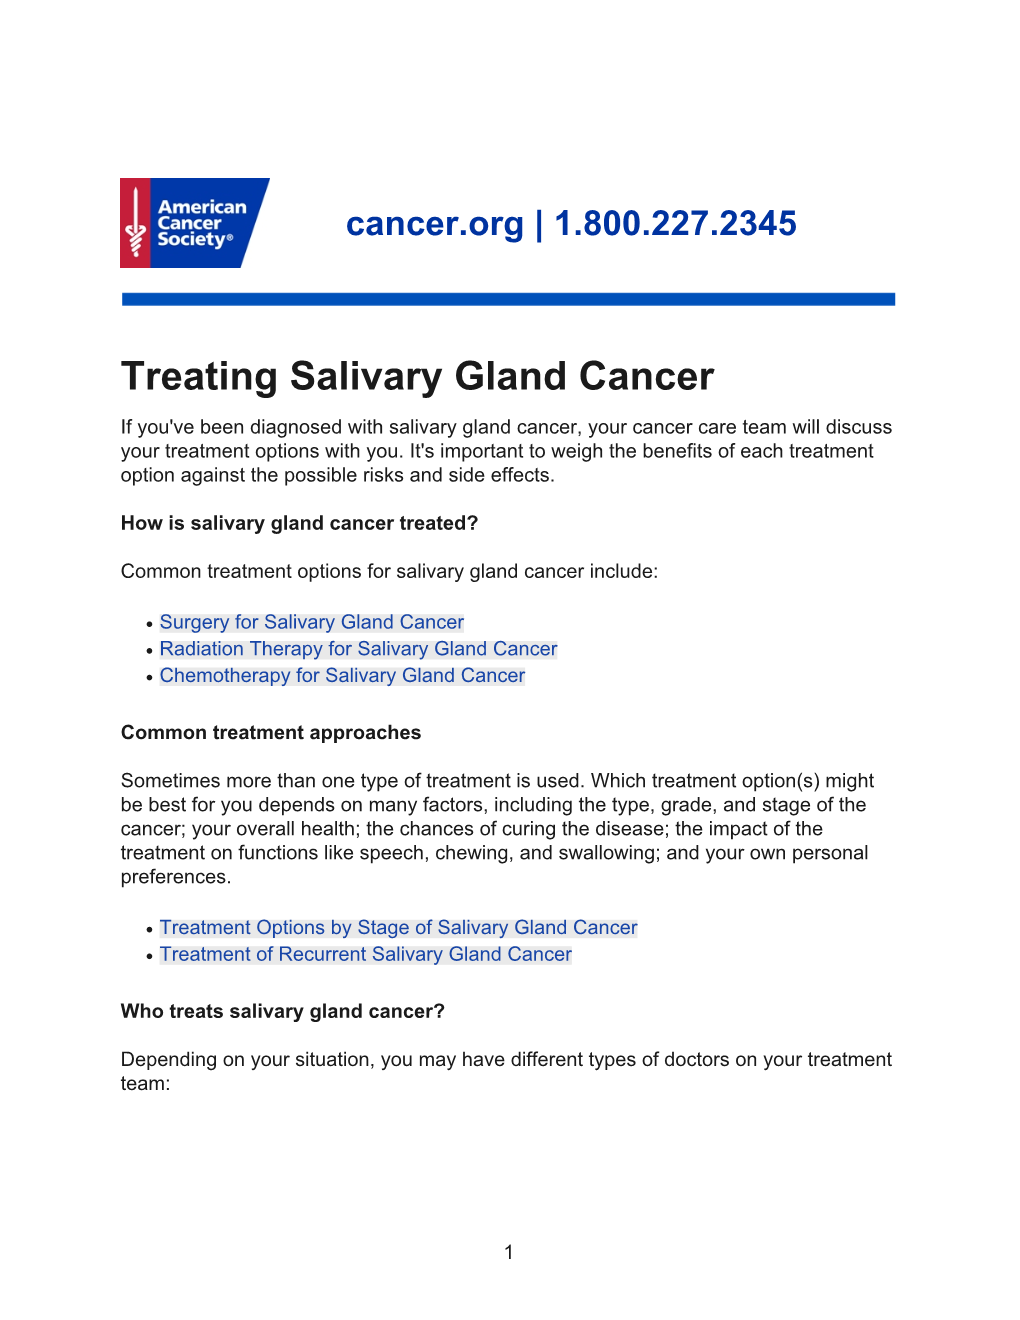 Treating Salivary Gland Cancer If You've Been Diagnosed with Salivary Gland Cancer, Your Cancer Care Team Will Discuss Your Treatment Options with You